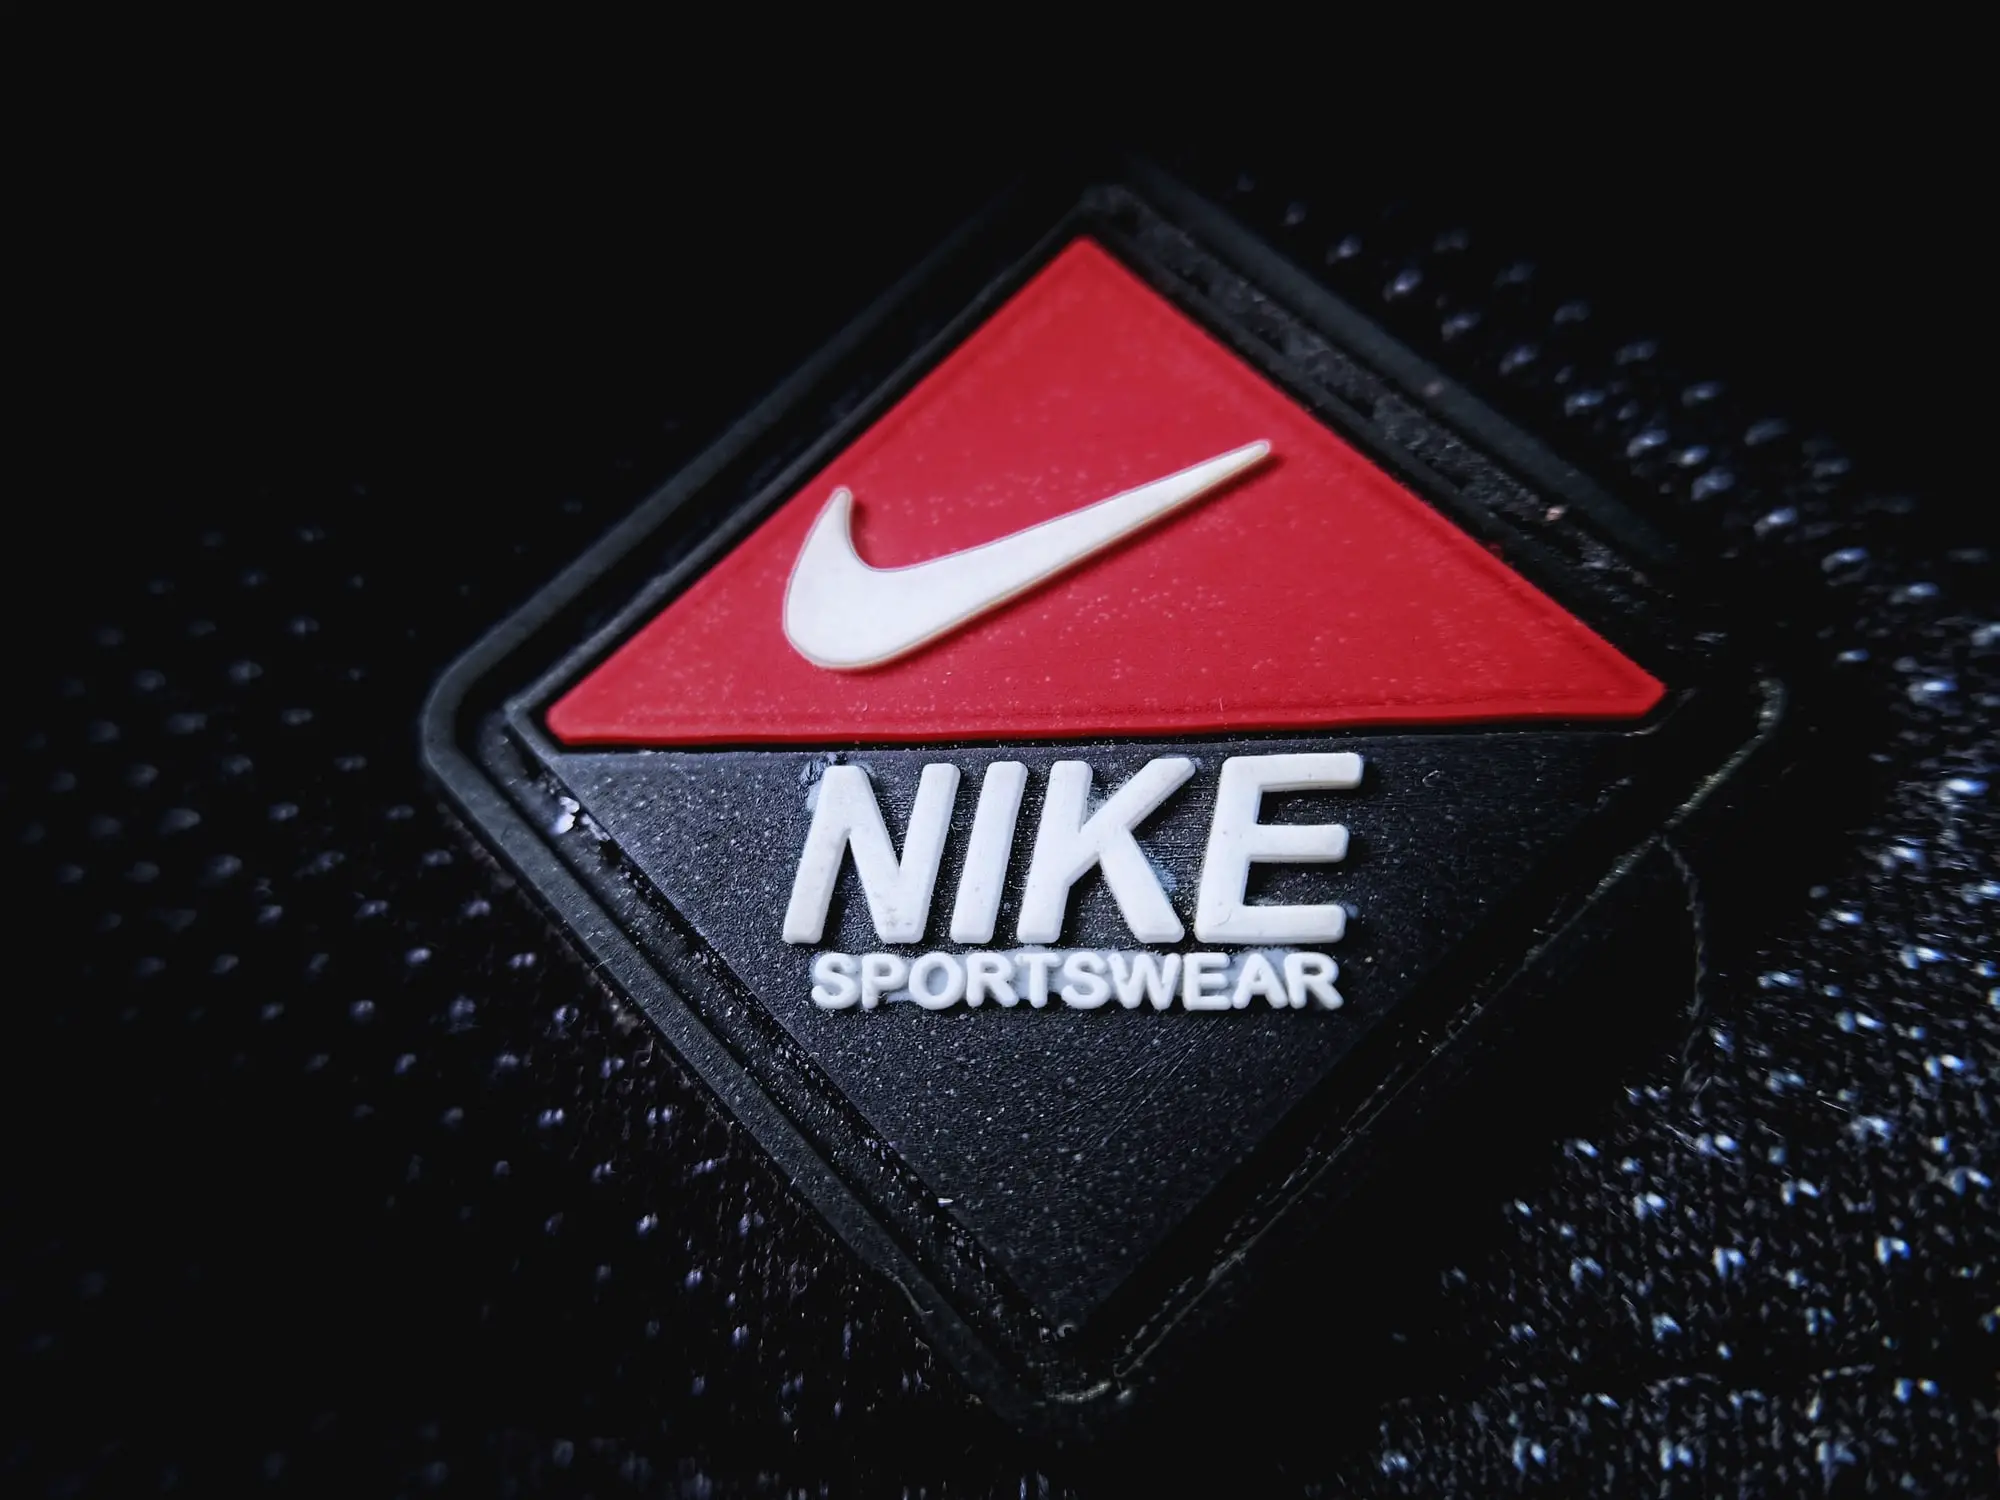 Aja single Rationalization What Companies are Owned by Nike? - Love At First Fit